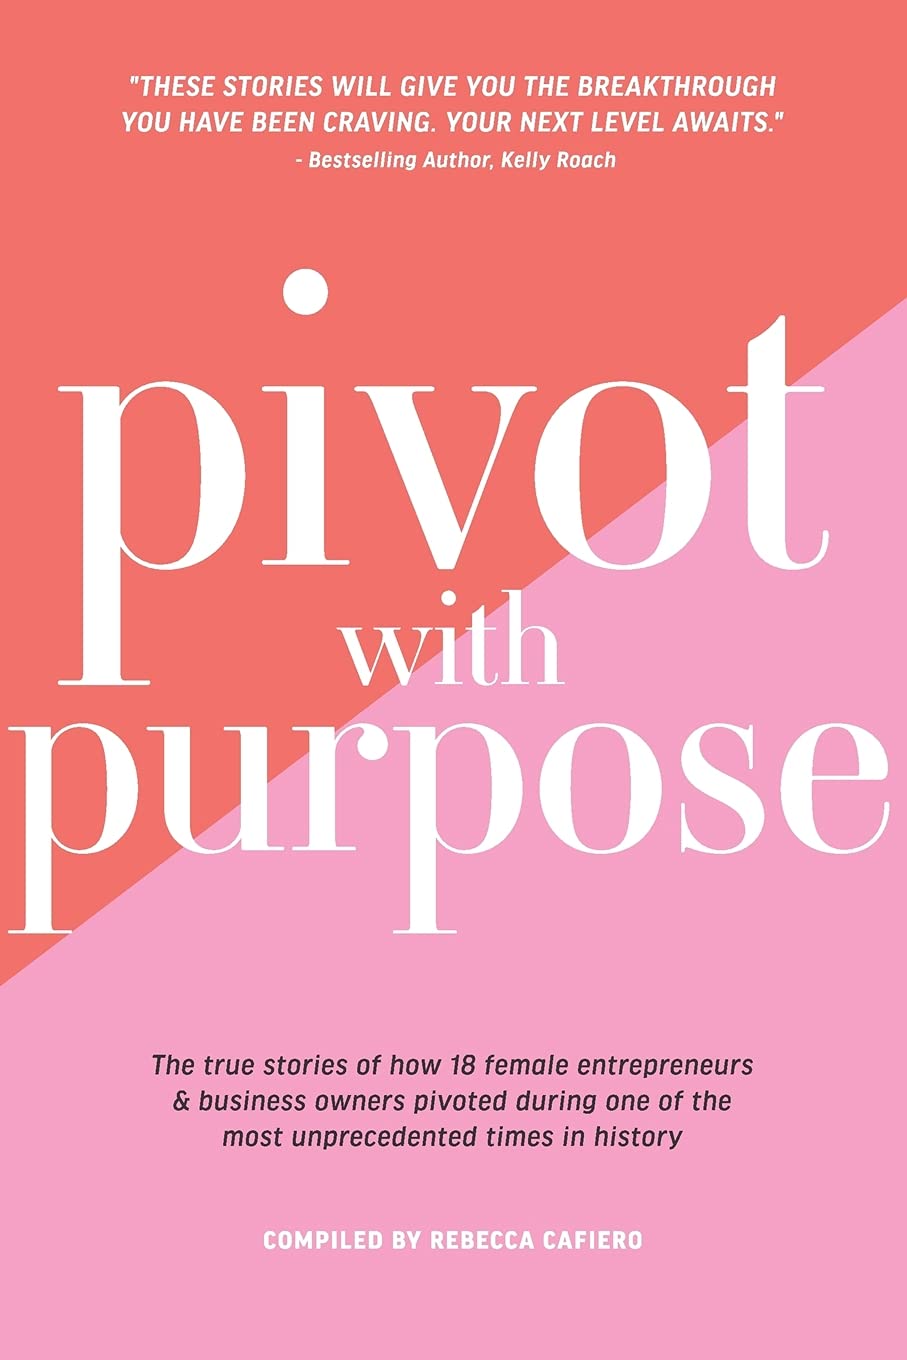 Pivot with Purpose- The true stories of how 18 female entrepreneurs & business owners